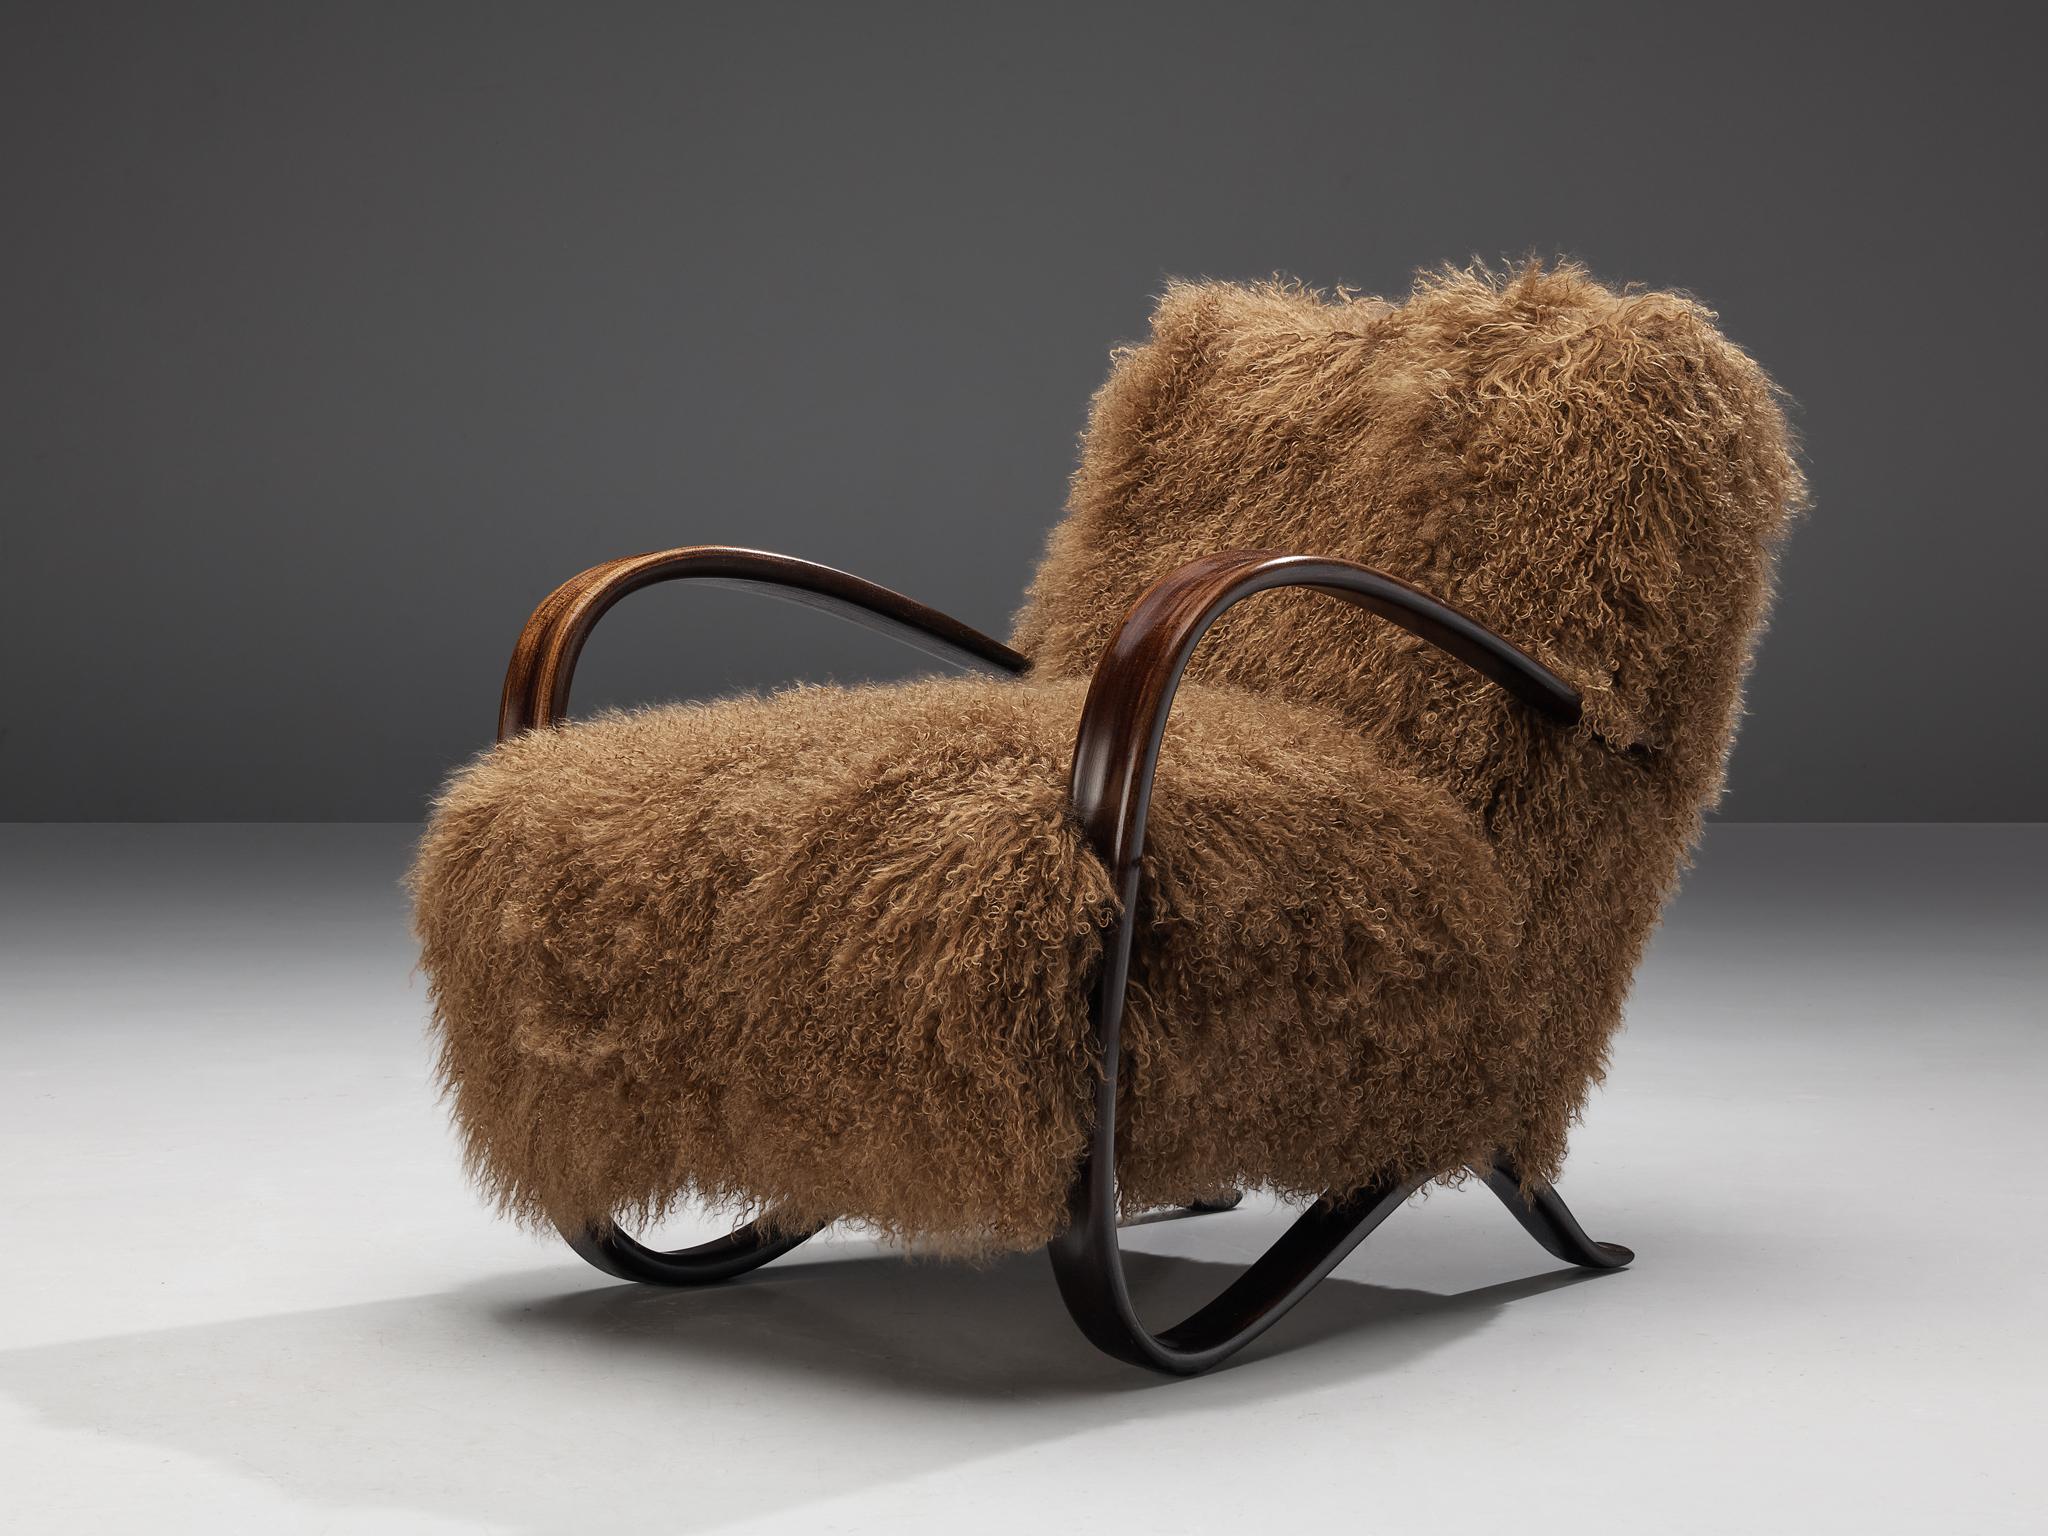 Jindrich Halabala, customizable lounge chairs, stained beech, Tibetan wool, Czech Republic, 1930s

Extraordinary easy chairs with brown Tibetan lamb’s wool upholstery. These chairs have a very dynamic and abundant appearance and the fuzzy upholstery